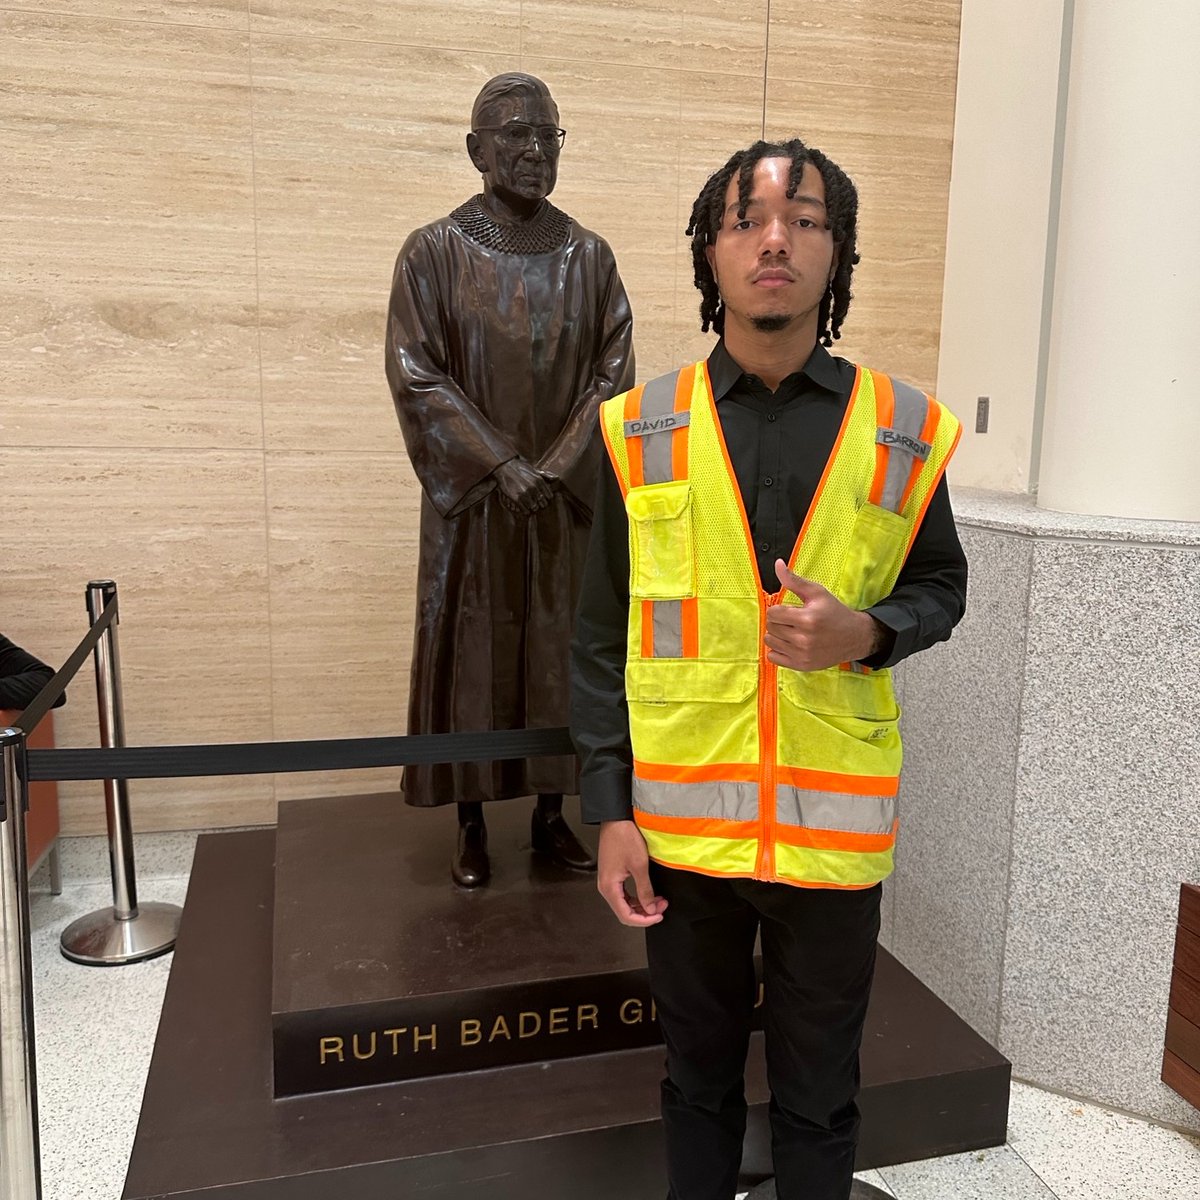 SUNY Empire's Corporate Executive Engagement Program allows students to have real life work experience. Check out SUNY Empire freshman, Jaylen Harper with Turner Construction Senior Project Manager David Barron at the Ruth Bader Ginsberg Hospital Construction site.